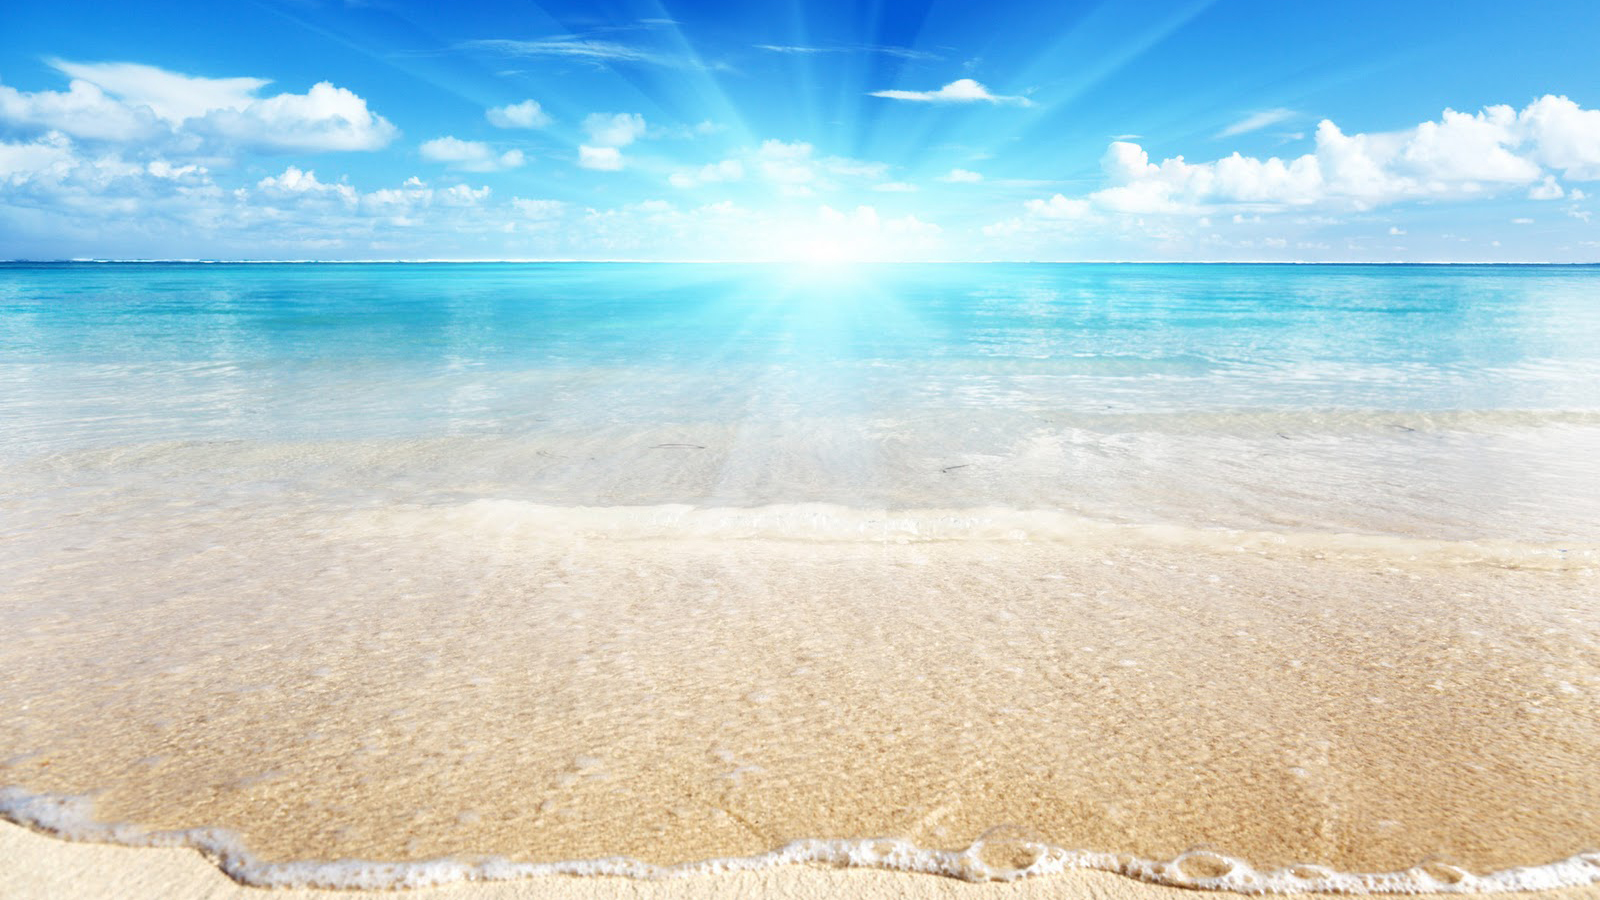 Sunshine Over The Sea Back To Wallpaper Home